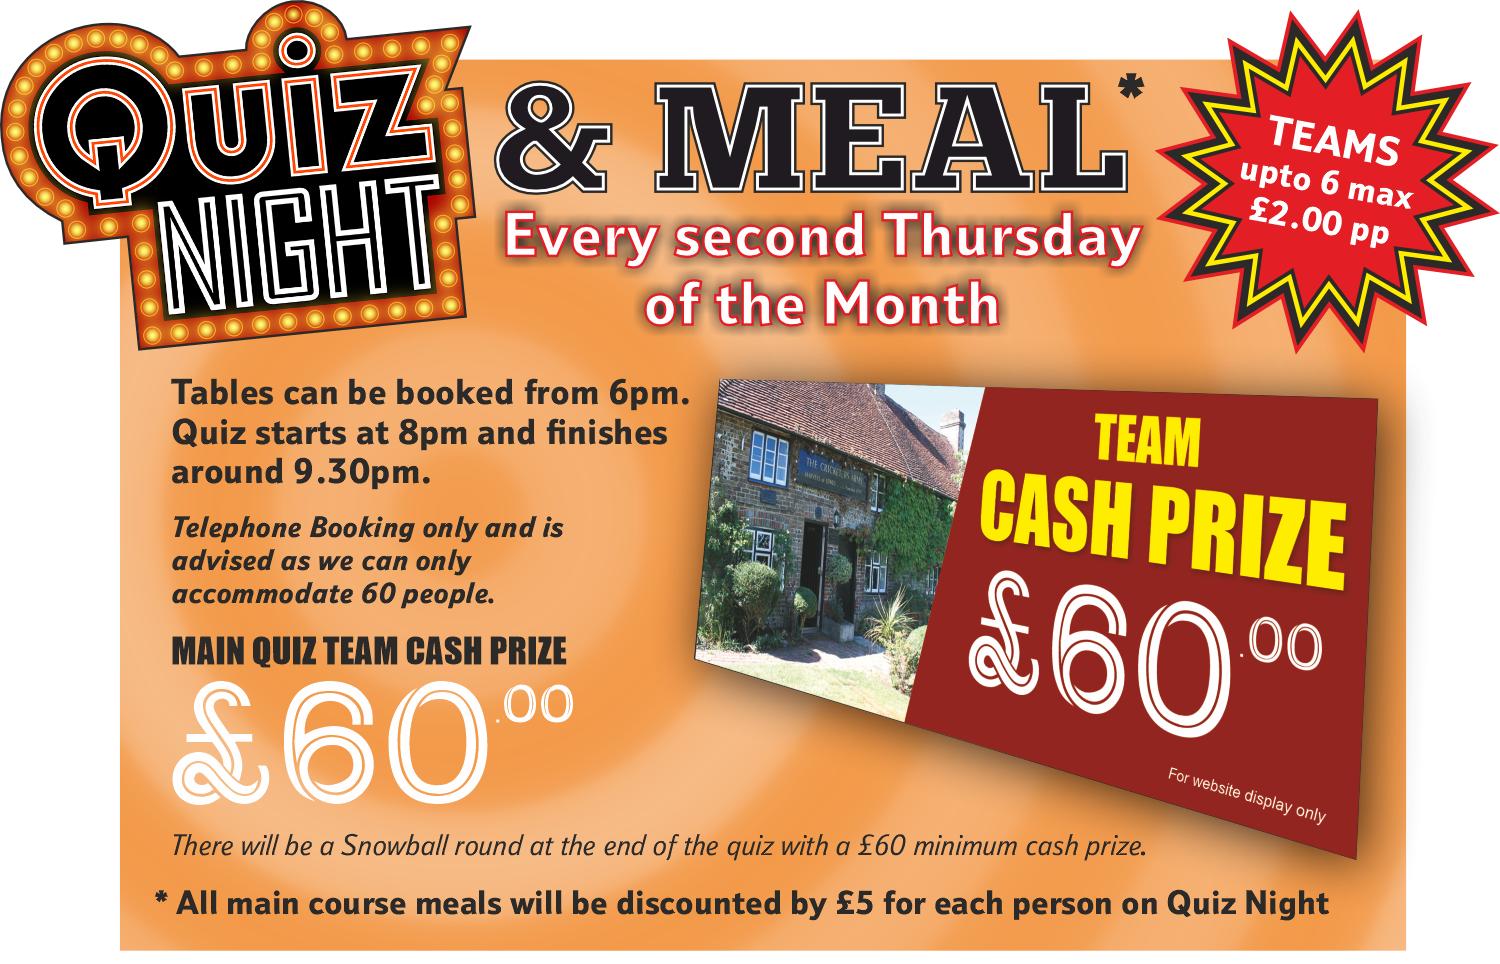 Quiz Night & Meal at The Cricketers, Berwick ~ Every Second Thursday of the Month ~ Team CASH Prize of £60.00. Click HERE to find out more.